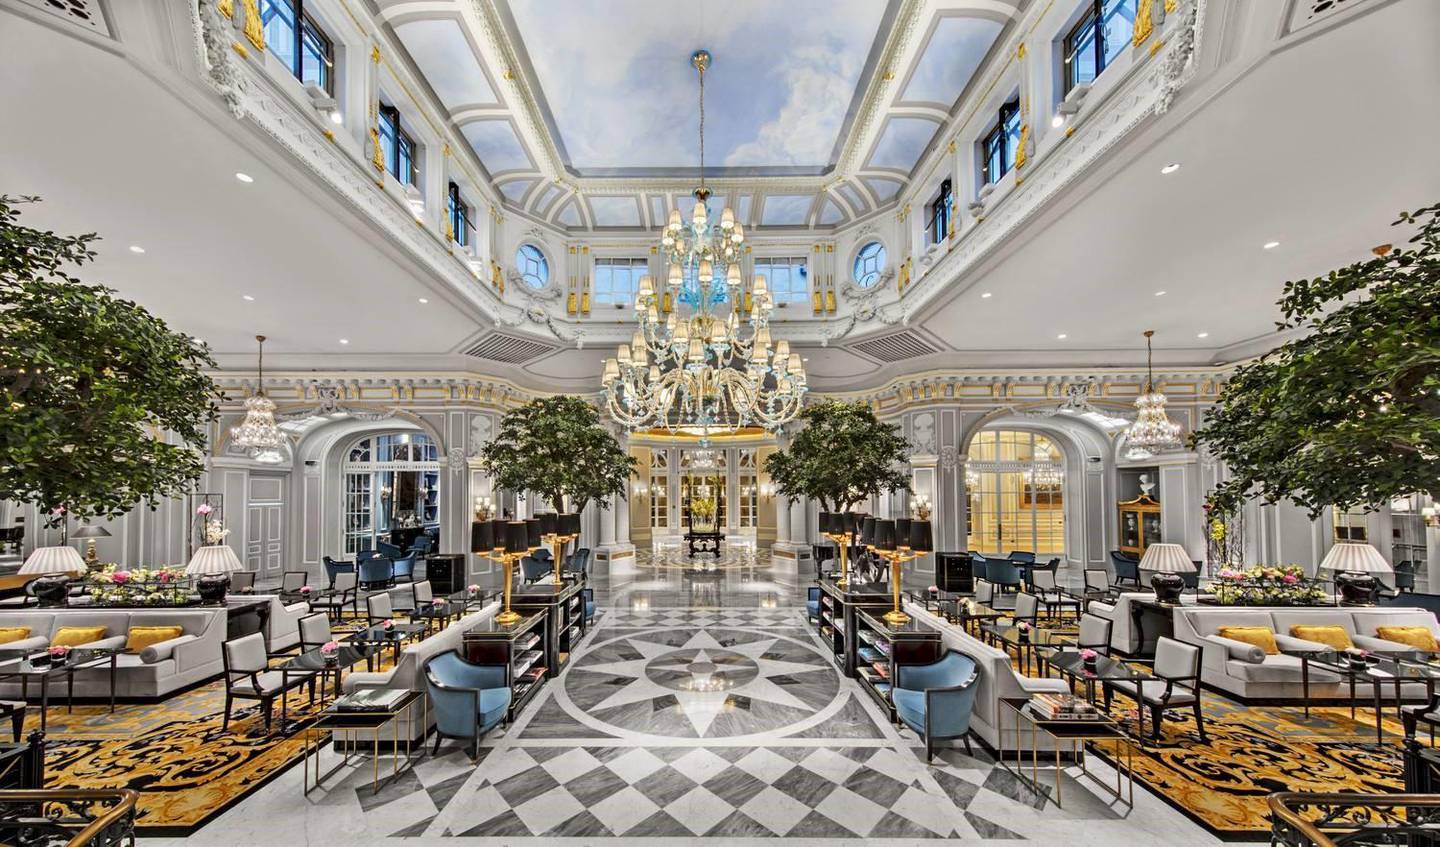 St. Regis Rome is ready to welcome travellers again as the luxury resort reopened in Italy. Courtesy St. Regis Rome / Facebook